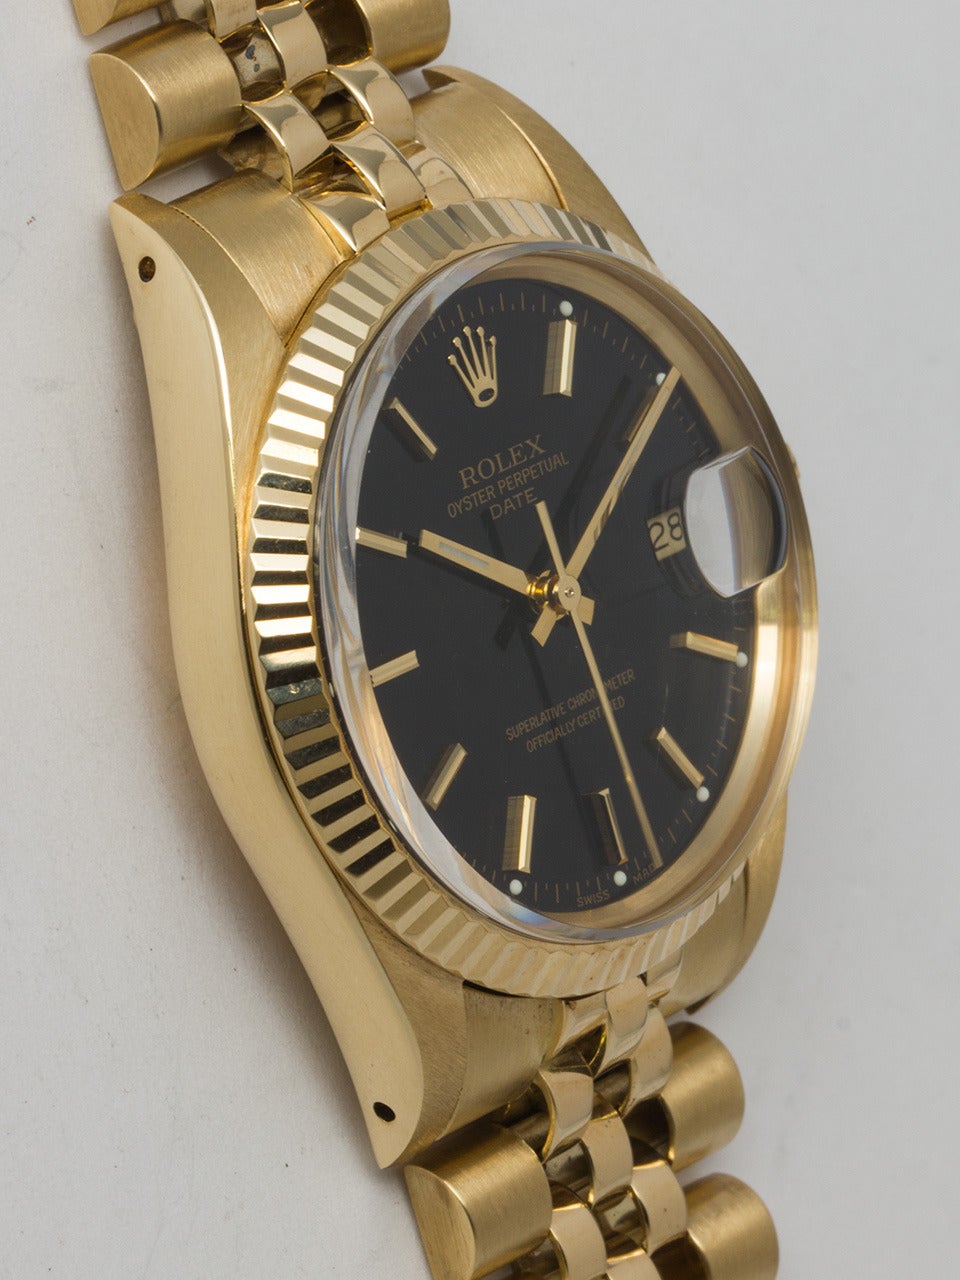 Rolex 14k Yellow Gold Oyster Perpetual Date Wristwatch, Ref. 15038, circa 1989. 34mm case with fluted bezel and acrylic crystal. Beautiful original glossy black dial with applied gold indexes and gold baton hands. Powered by a self-winding calibre